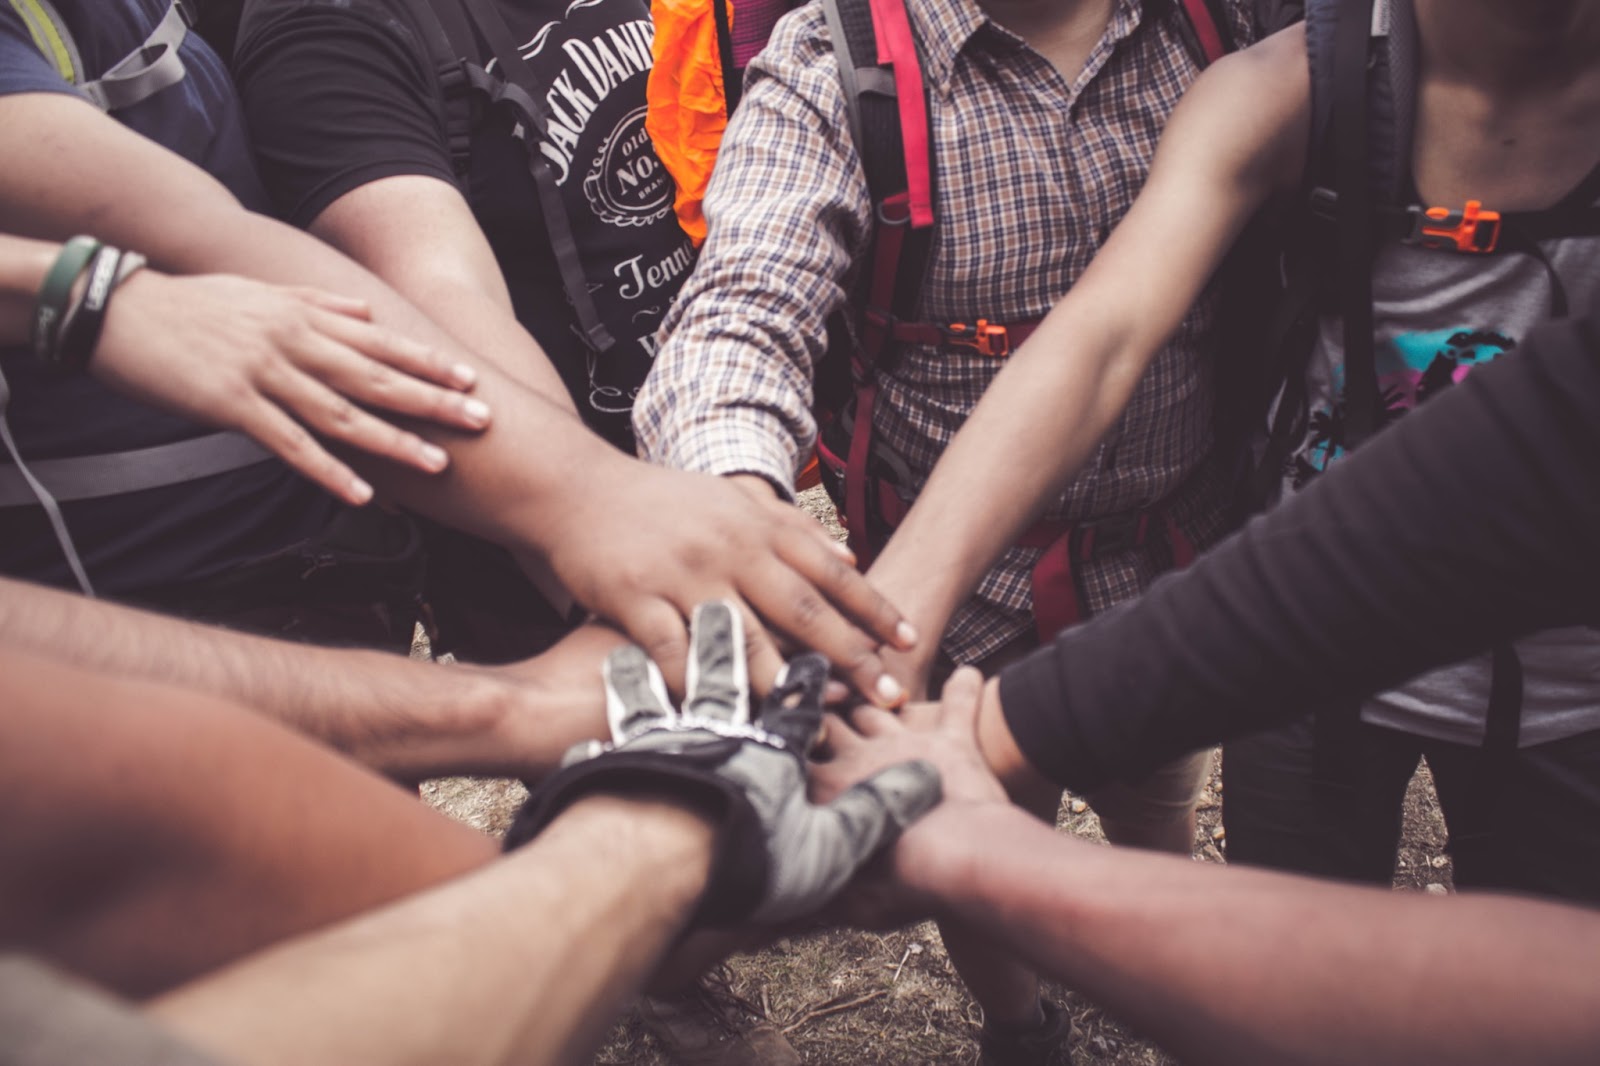 A group of people putting their hands together.